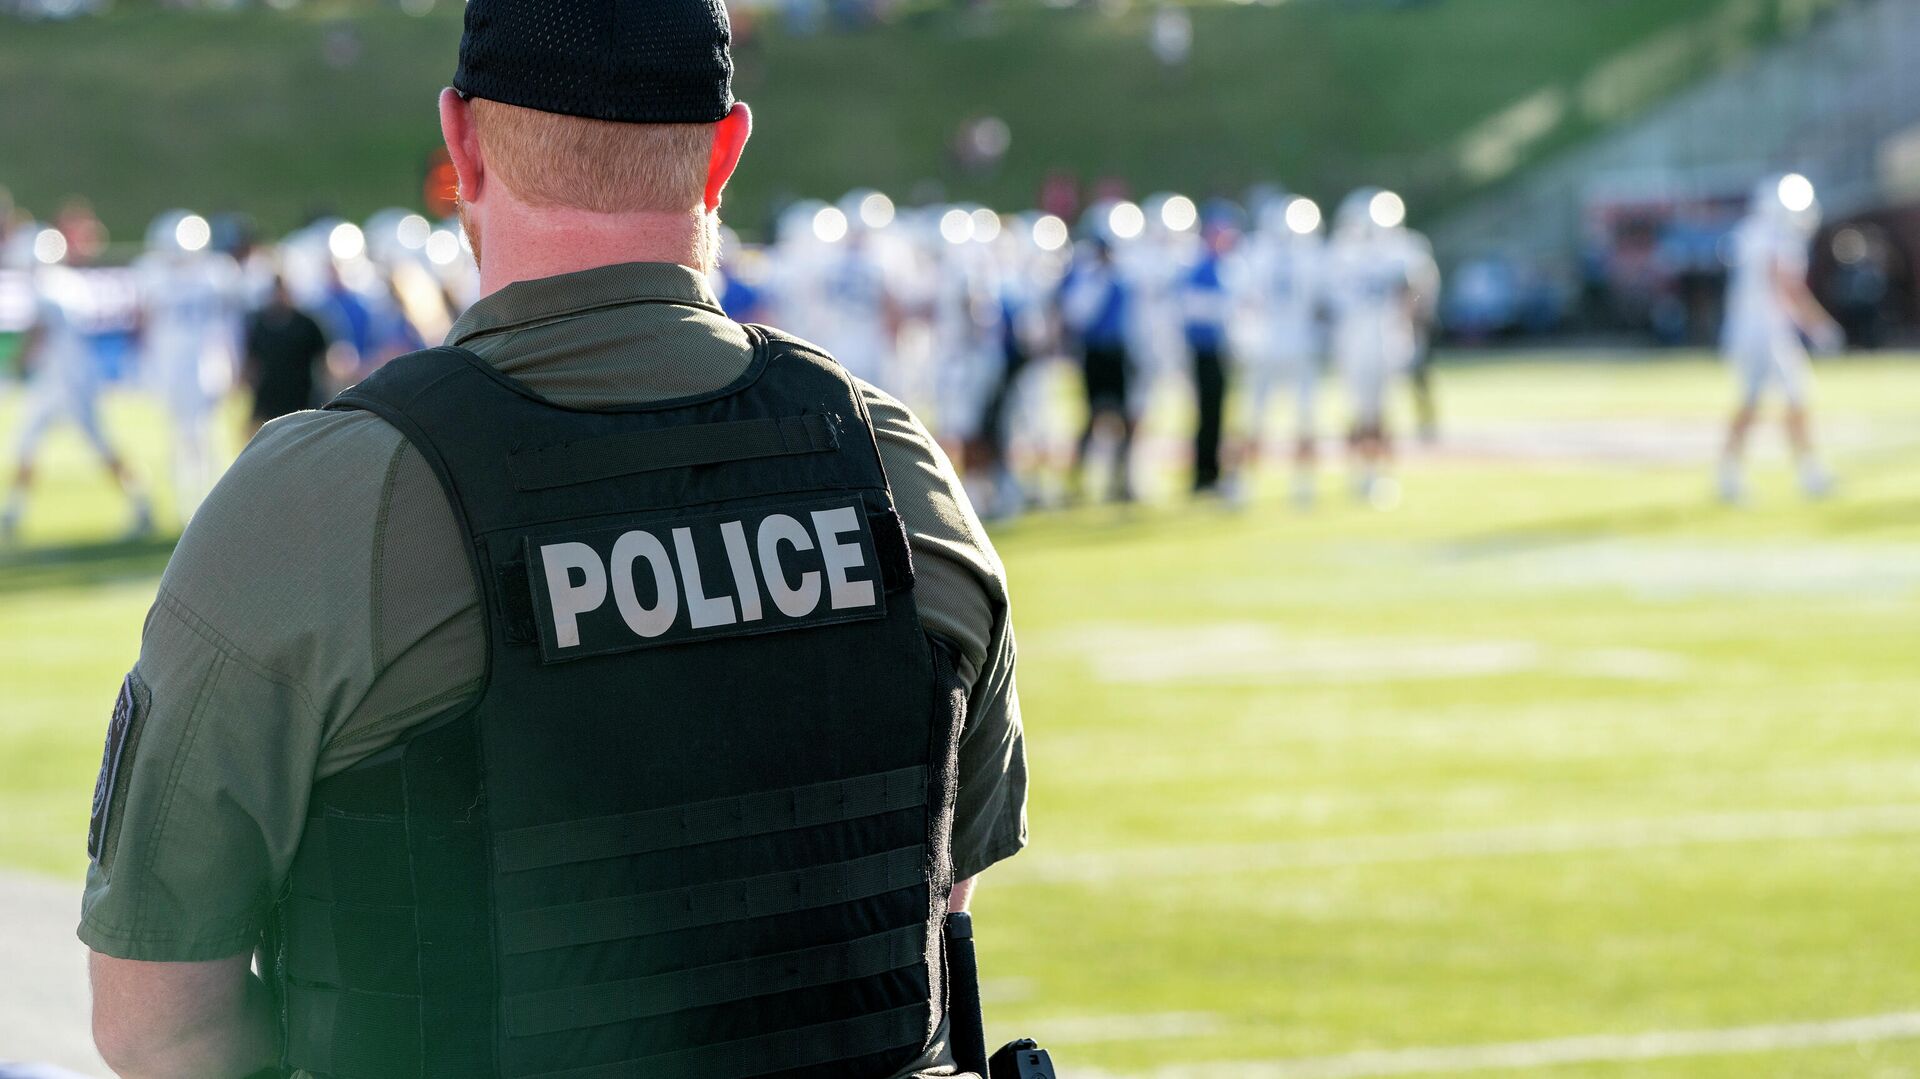 A police officer stands on the sidelines during the First Responder Bowl NCAA college football game between Air Force and Louisville Tuesday, Dec. 28, 2021, in Dallas. - Sputnik International, 1920, 15.01.2022